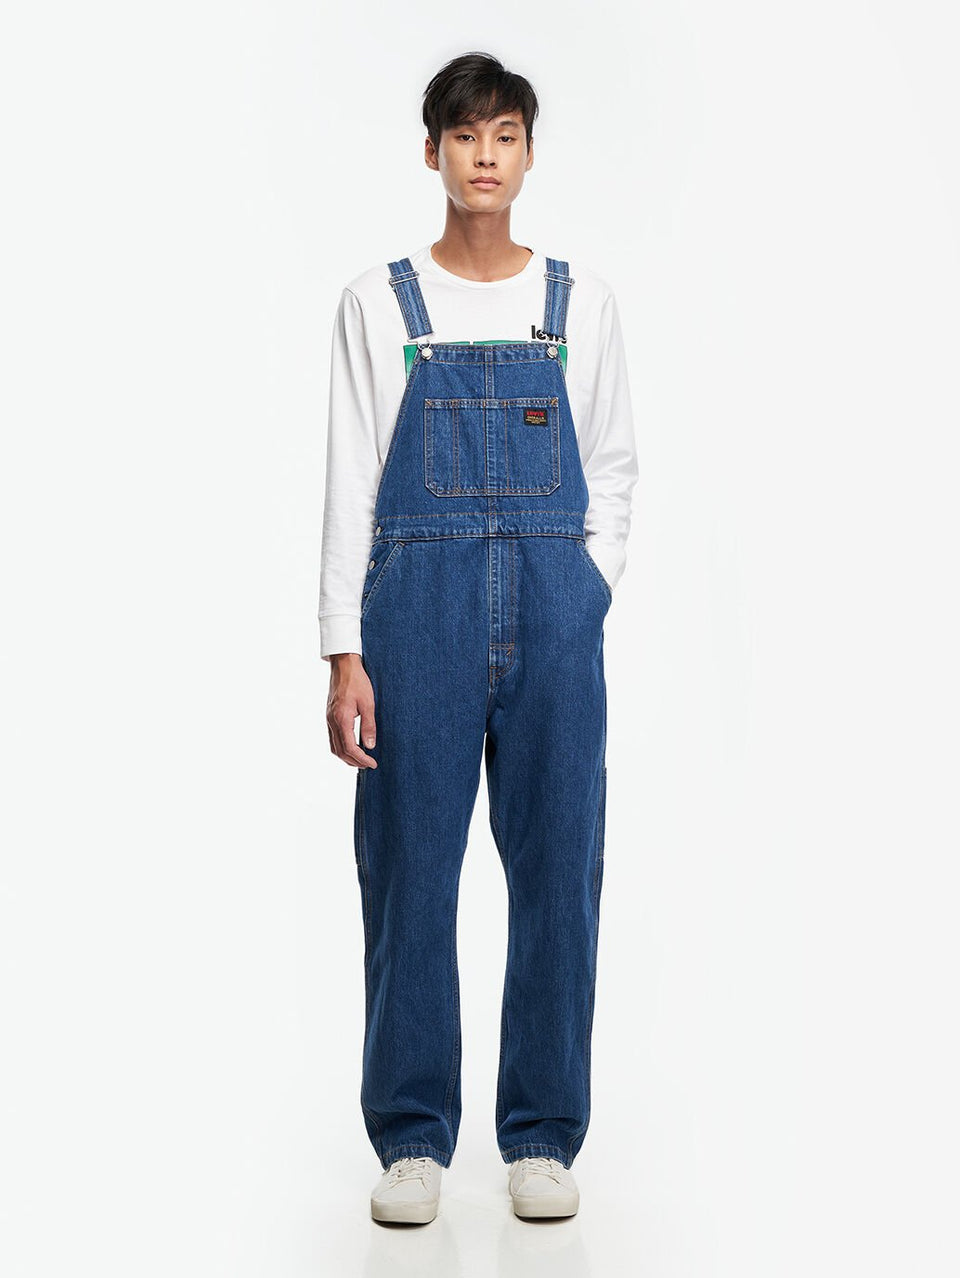 Levis Men's Red Tab Overalls Saturday Morning